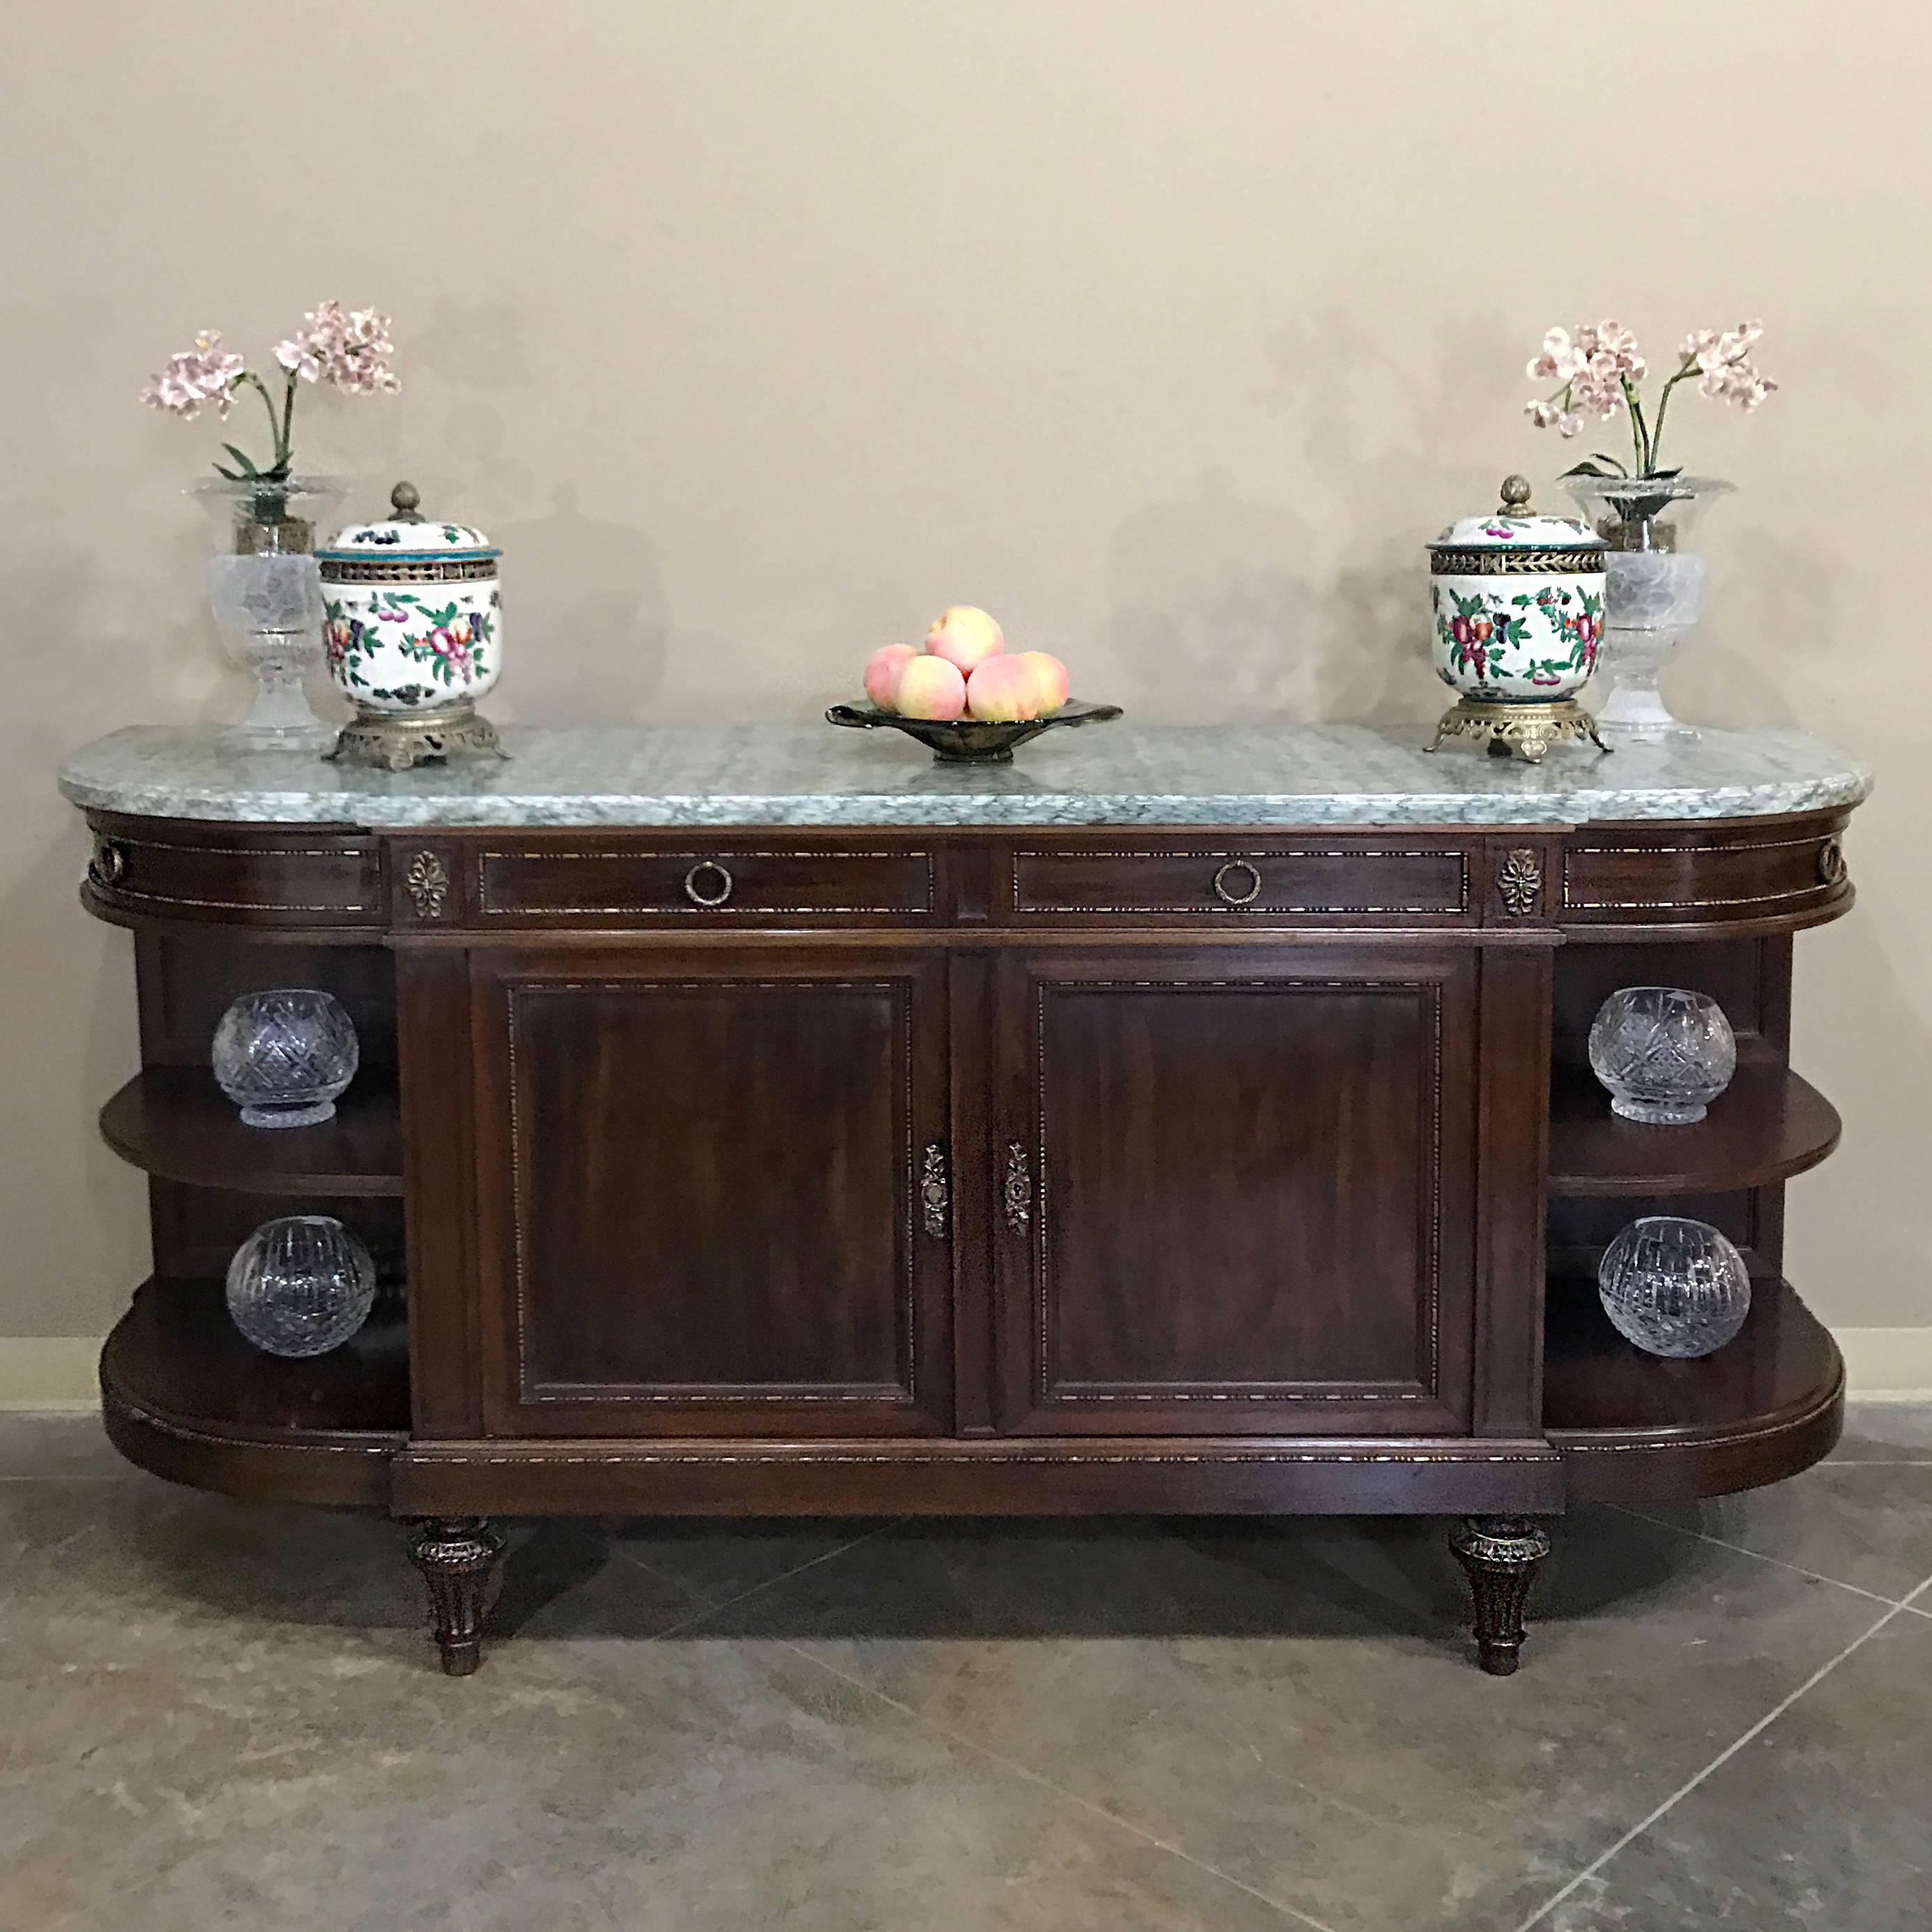 19th century French neoclassical mahogany marble top buffet features rounded sides with open display shelves so that you can display, serve and store in style,
circa 1890s
Measures: 38 H x 79 W x 22 D.